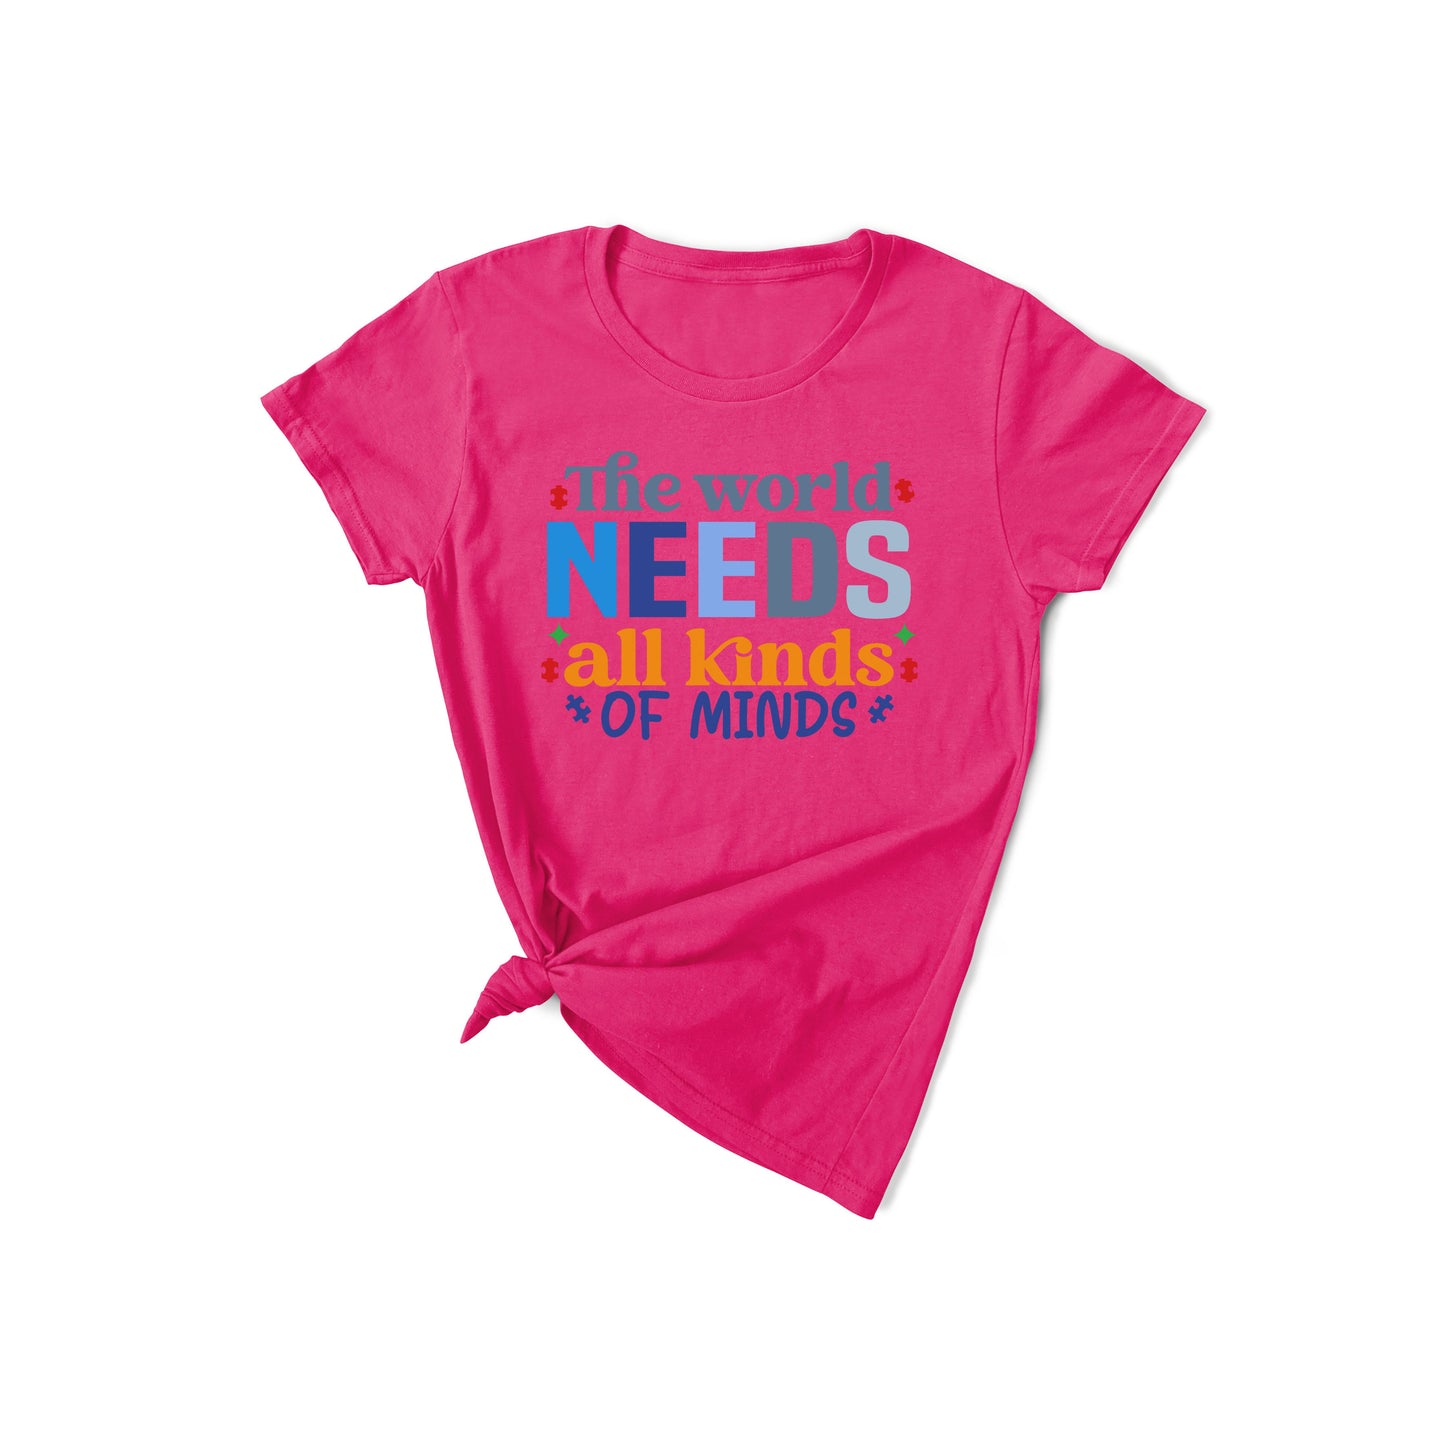 The World Needs All Kinds of Minds - Autism T-Shirt